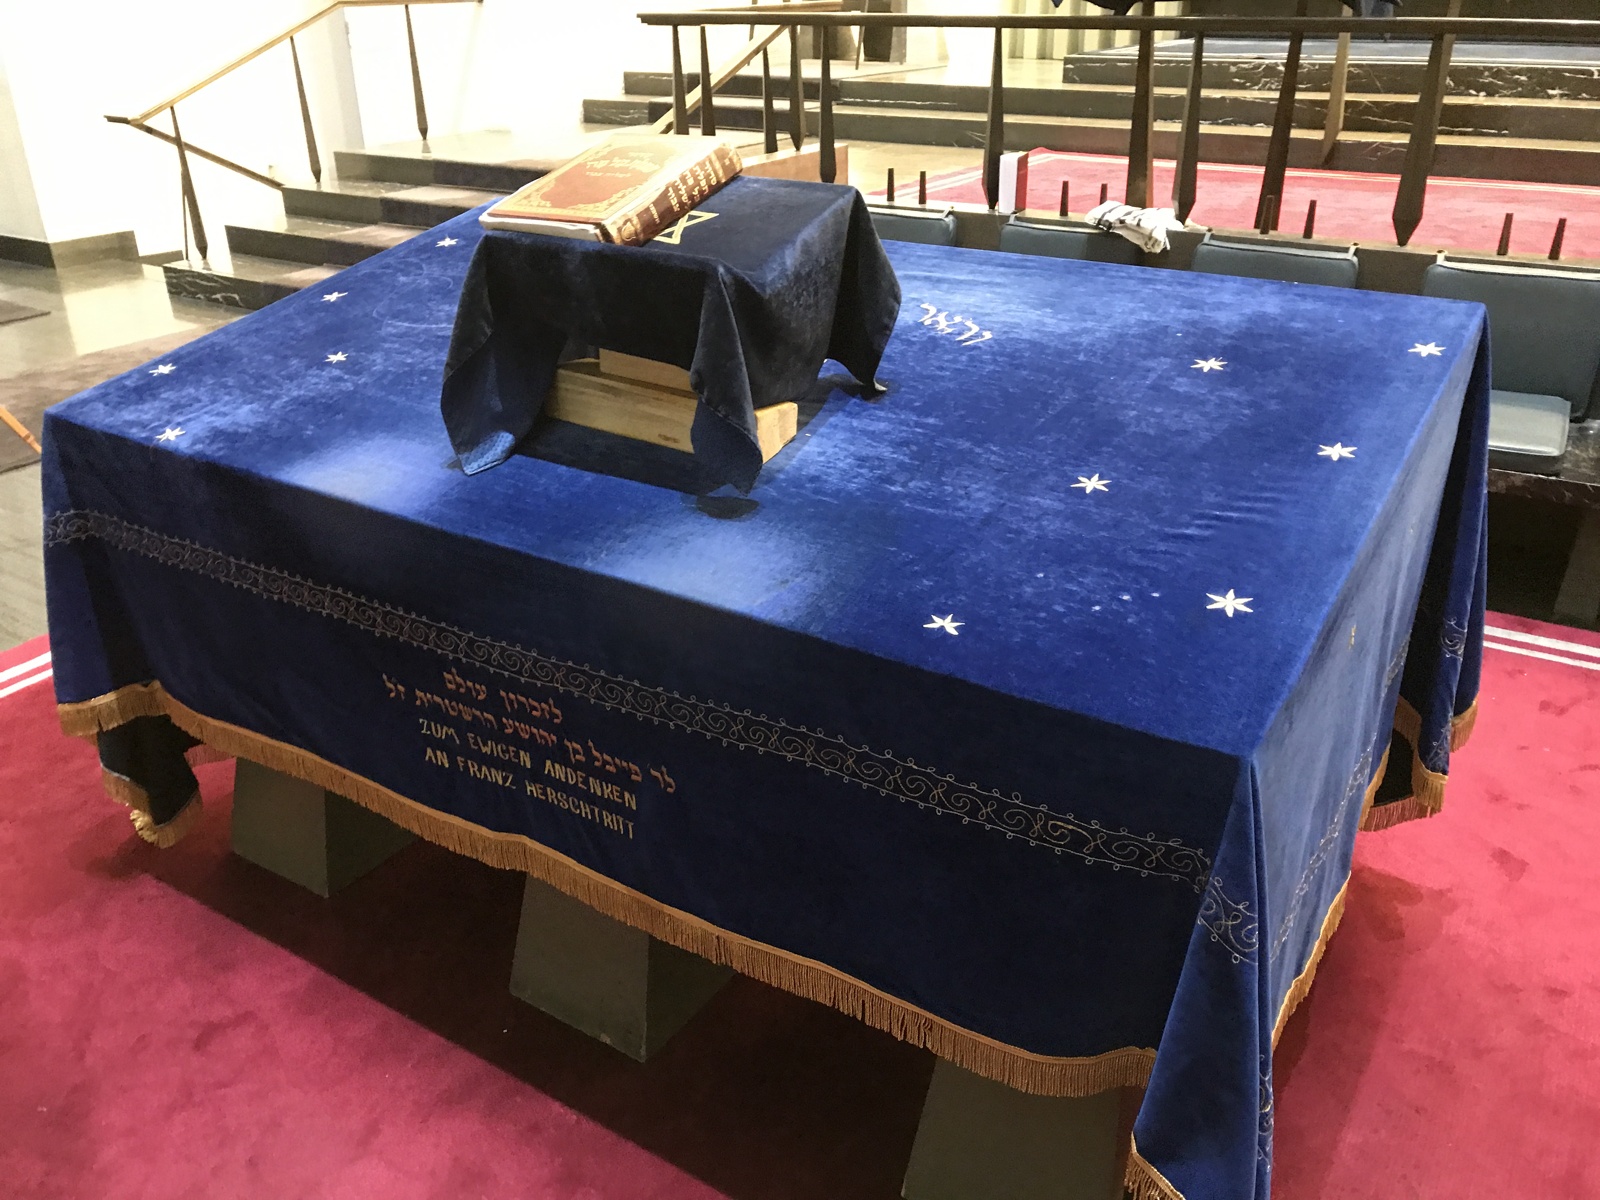 Big table with a blue velvet cloth and on top smaller stand with a book (synagogue).